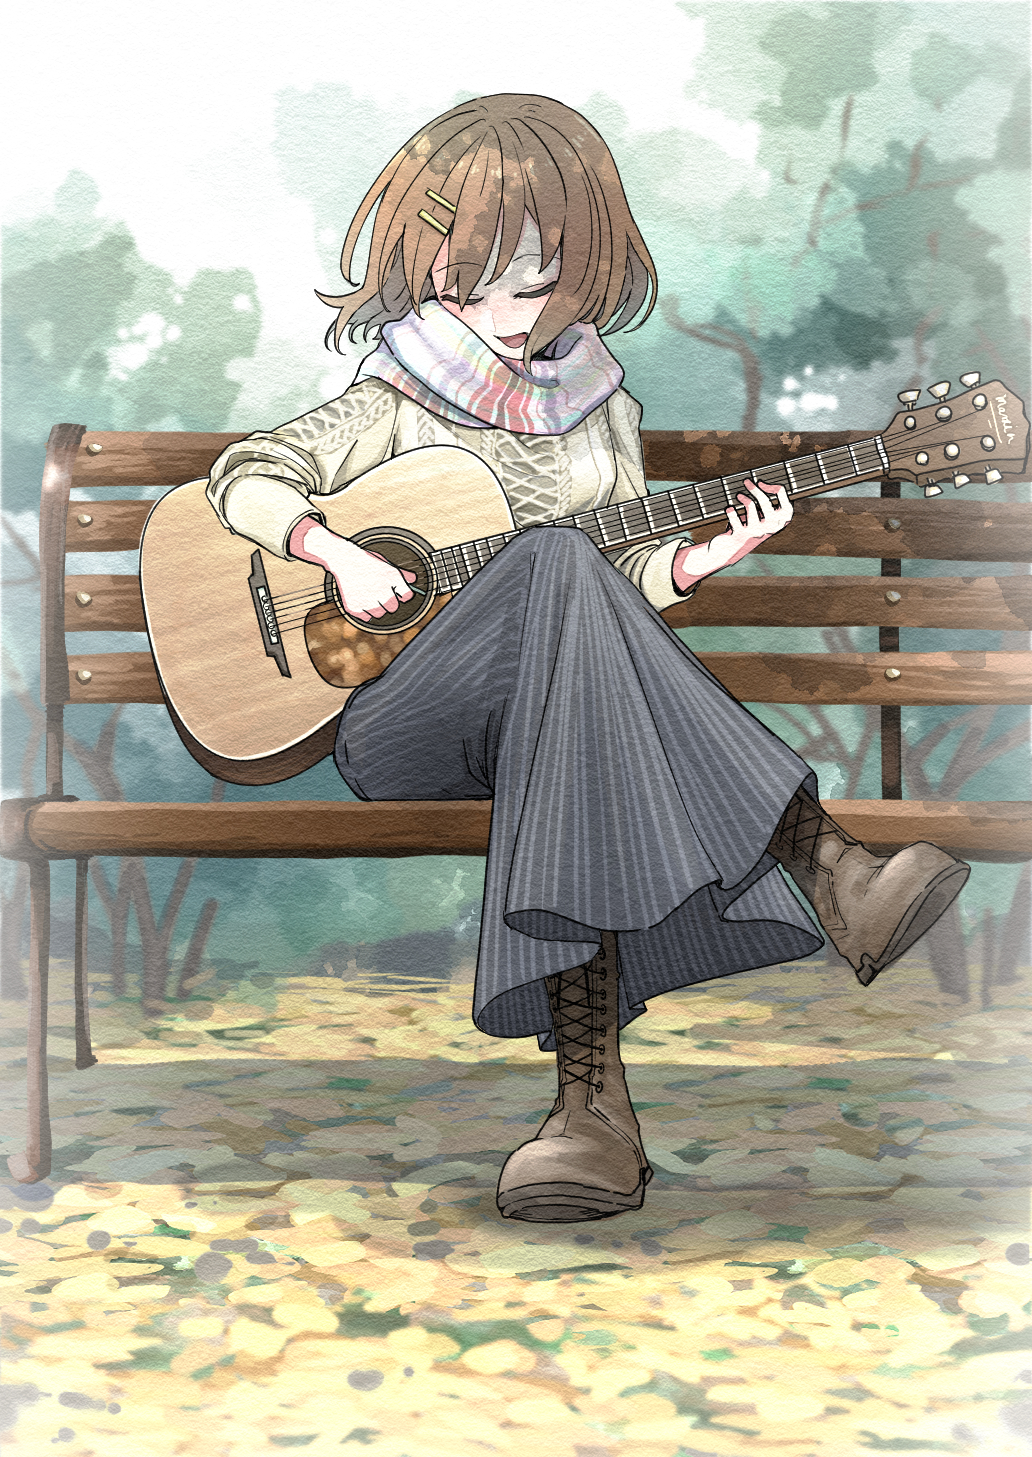 1girl acoustic_guitar aran_sweater autumn_leaves bangs bench bob_cut boots brown_footwear brown_hair brown_legwear casual closed_eyes commentary cross-laced_footwear crossed_legs etokakaitari foliage full_body guitar hair_ornament hairclip head_down highres hirasawa_yui holding holding_instrument holding_plectrum instrument k-on! knee_boots lace-up_boots leaf long_skirt long_sleeves music on_bench open_mouth outdoors park park_bench pinstripe_skirt playing_instrument plectrum scarf shaded_face shadow short_hair singing sitting skirt solo striped striped_neckwear sweater texture tree white_scarf white_sweater wind